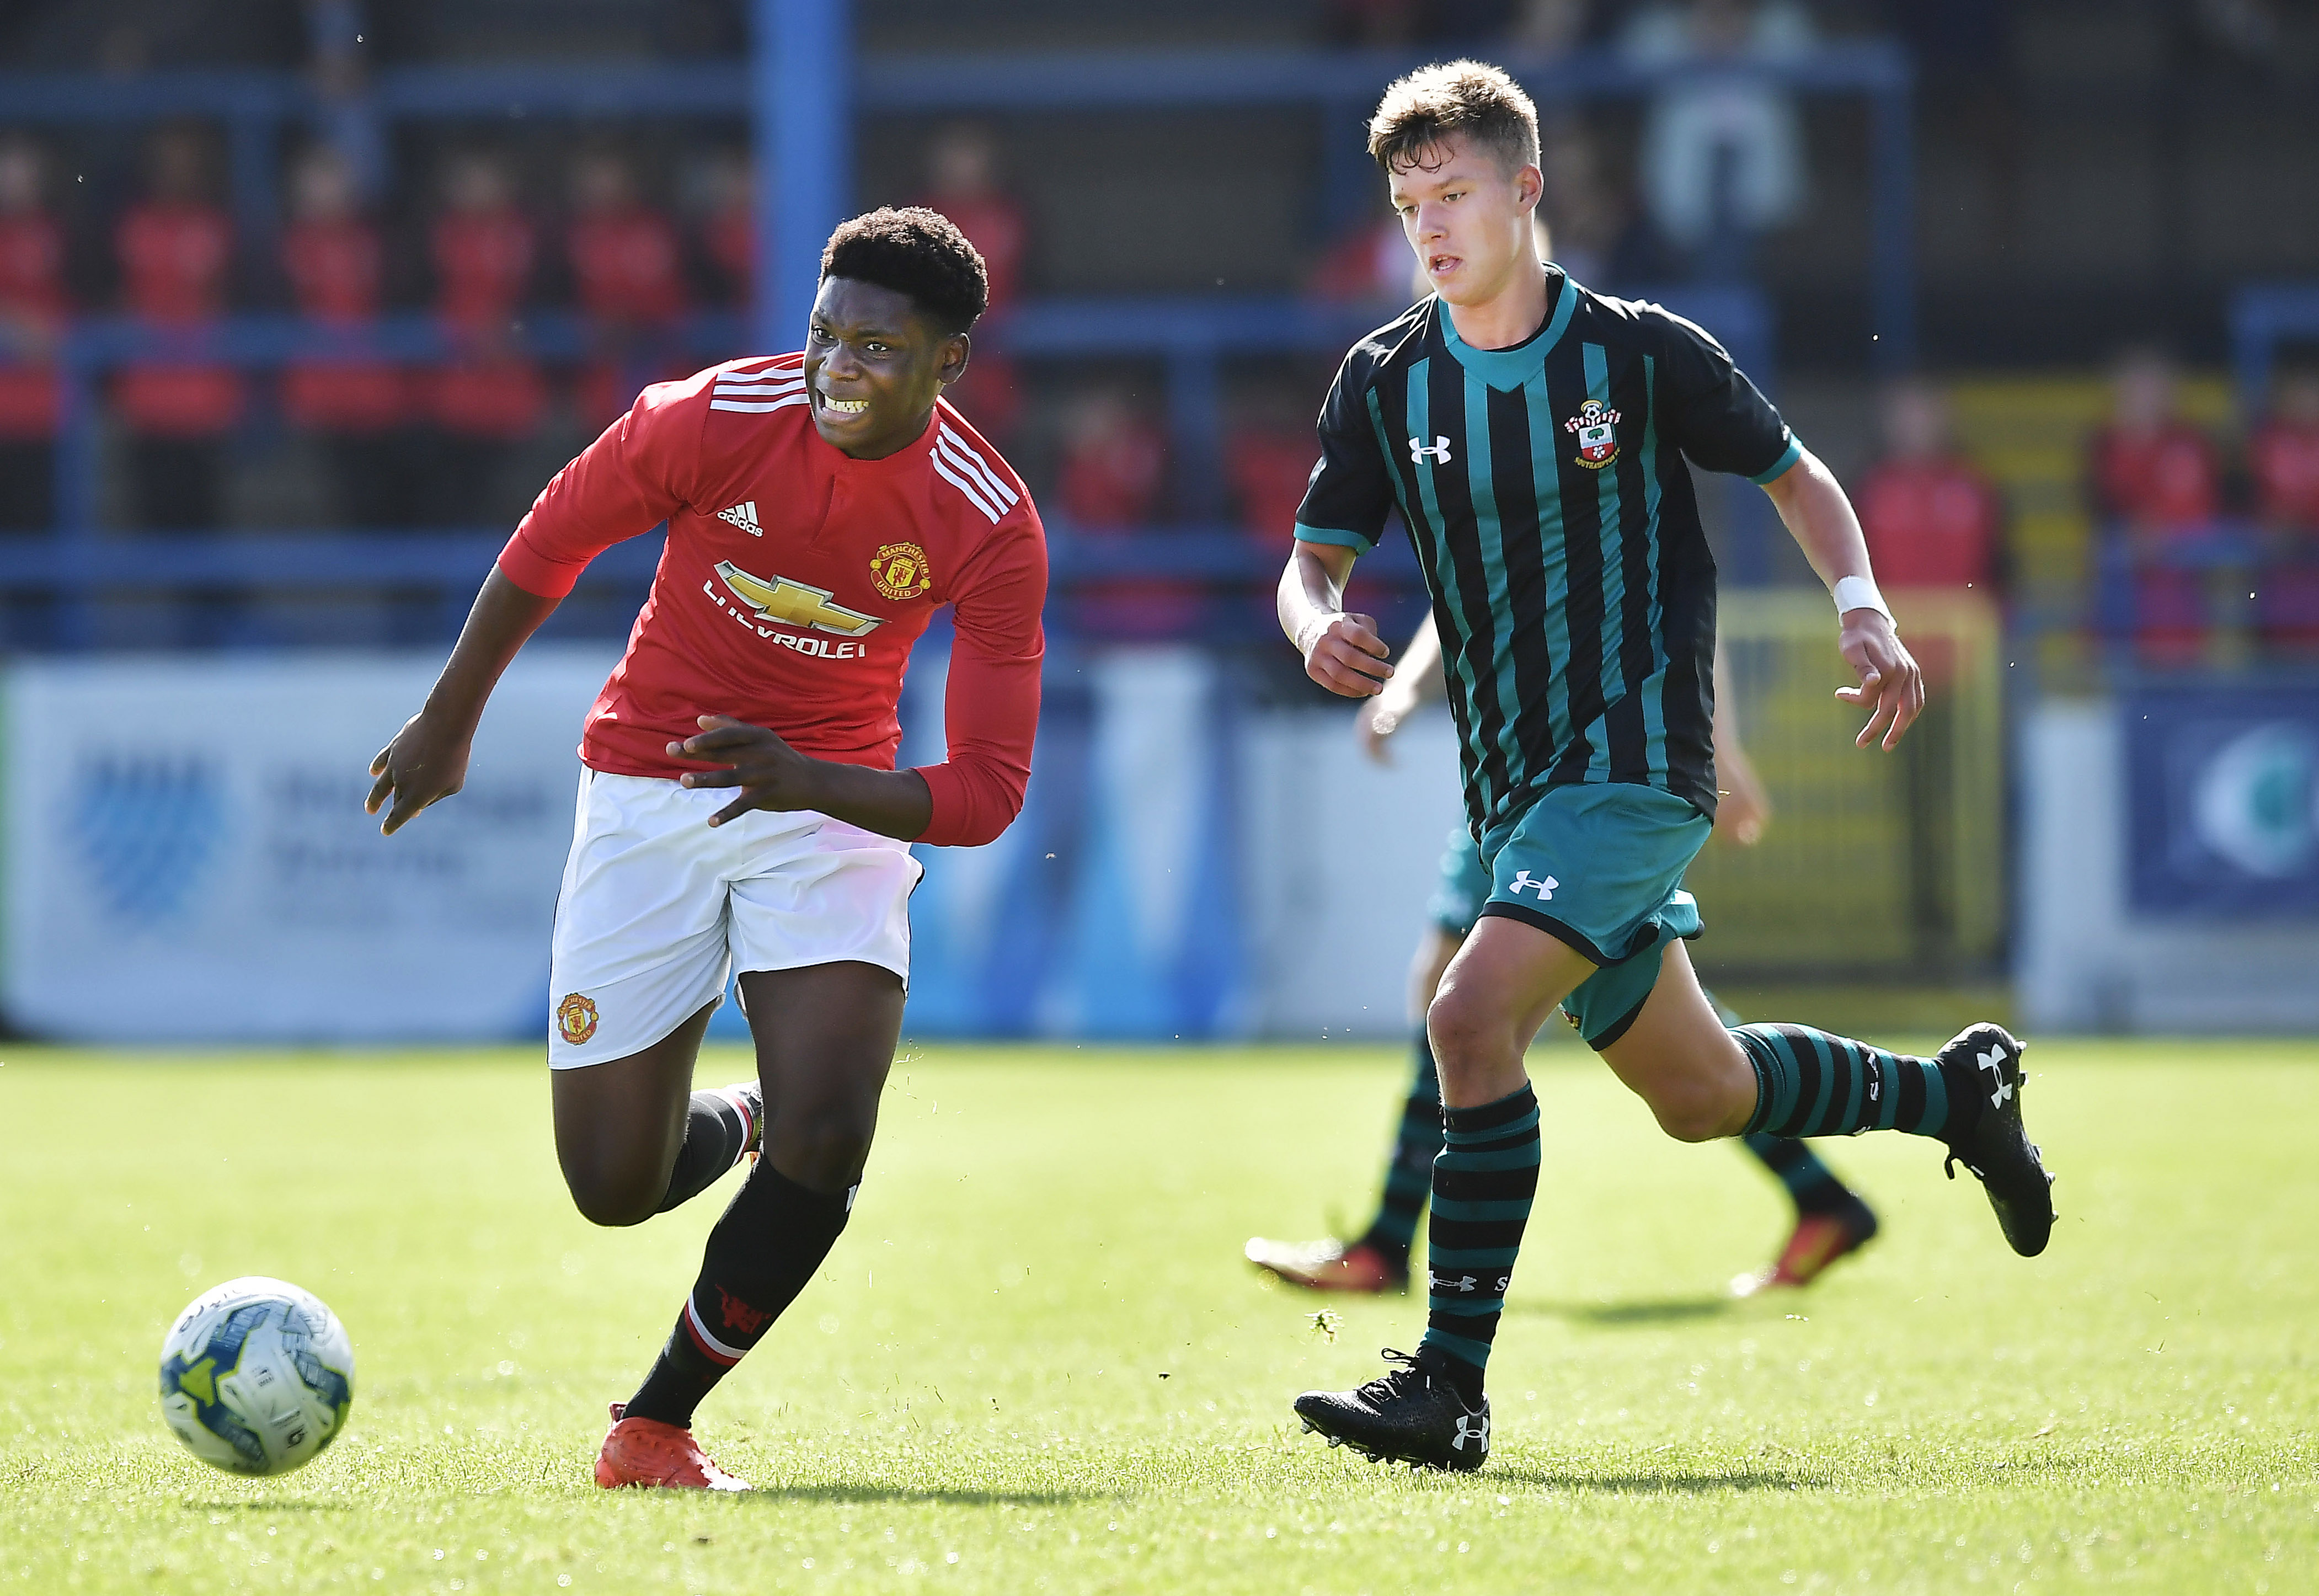 COLERAINE, NORTHERN IRELAND - JULY 26: Ademipo Odubeko (L) of Manchester United and Jack Turner (R) of Southampton during the Super Cup NI tournament group game between Manchester United u16's and Southampton u16's at the Showgrounds on July 26, 2017 in Coleraine, Northern Ireland. (Photo by Charles McQuillan/Getty Images)